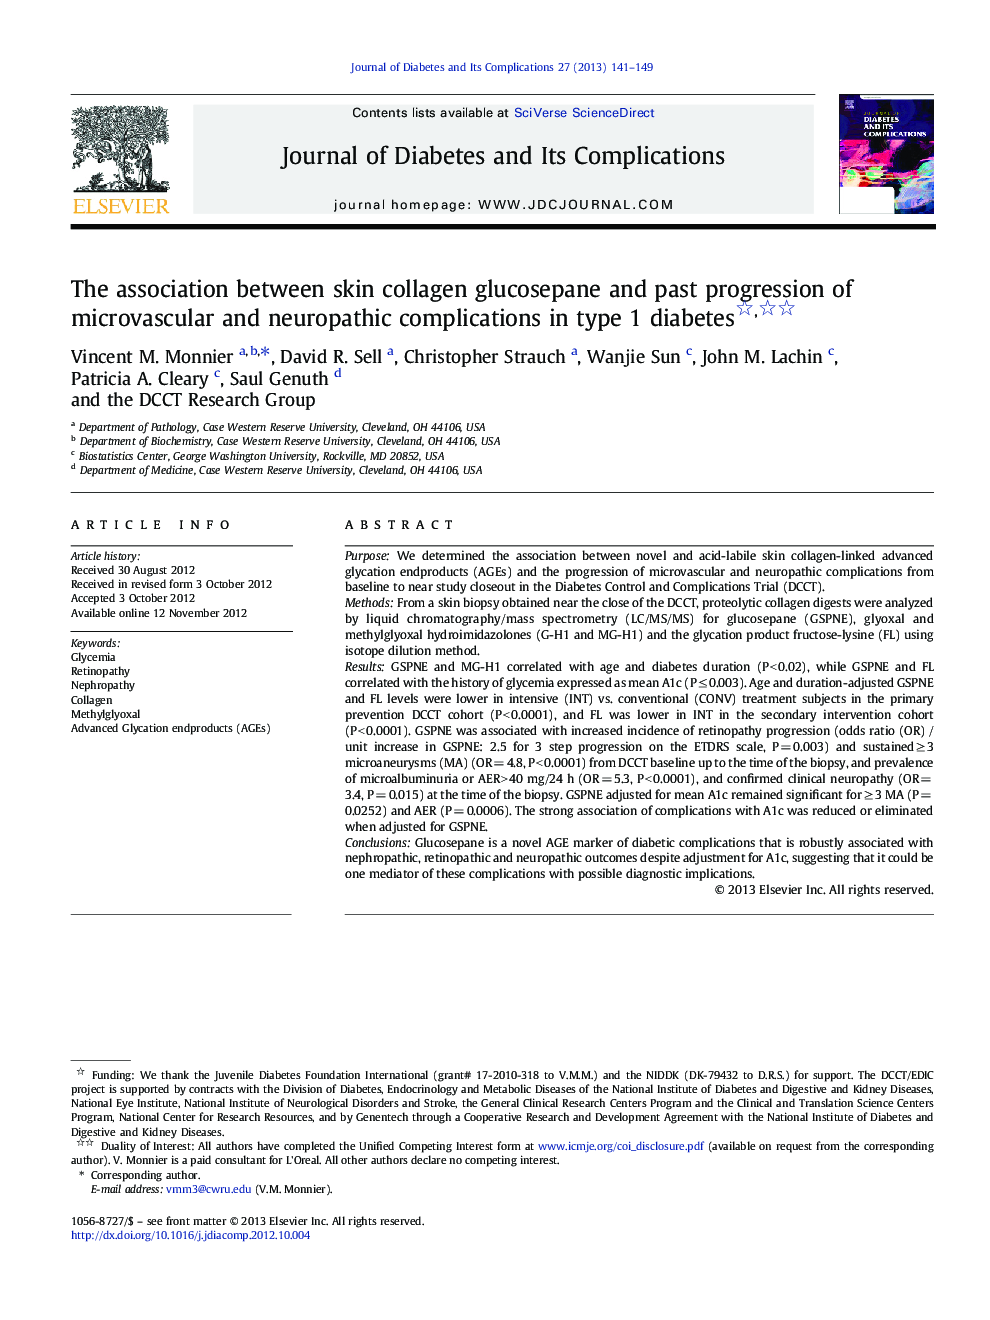 The association between skin collagen glucosepane and past progression of microvascular and neuropathic complications in type 1 diabetes 